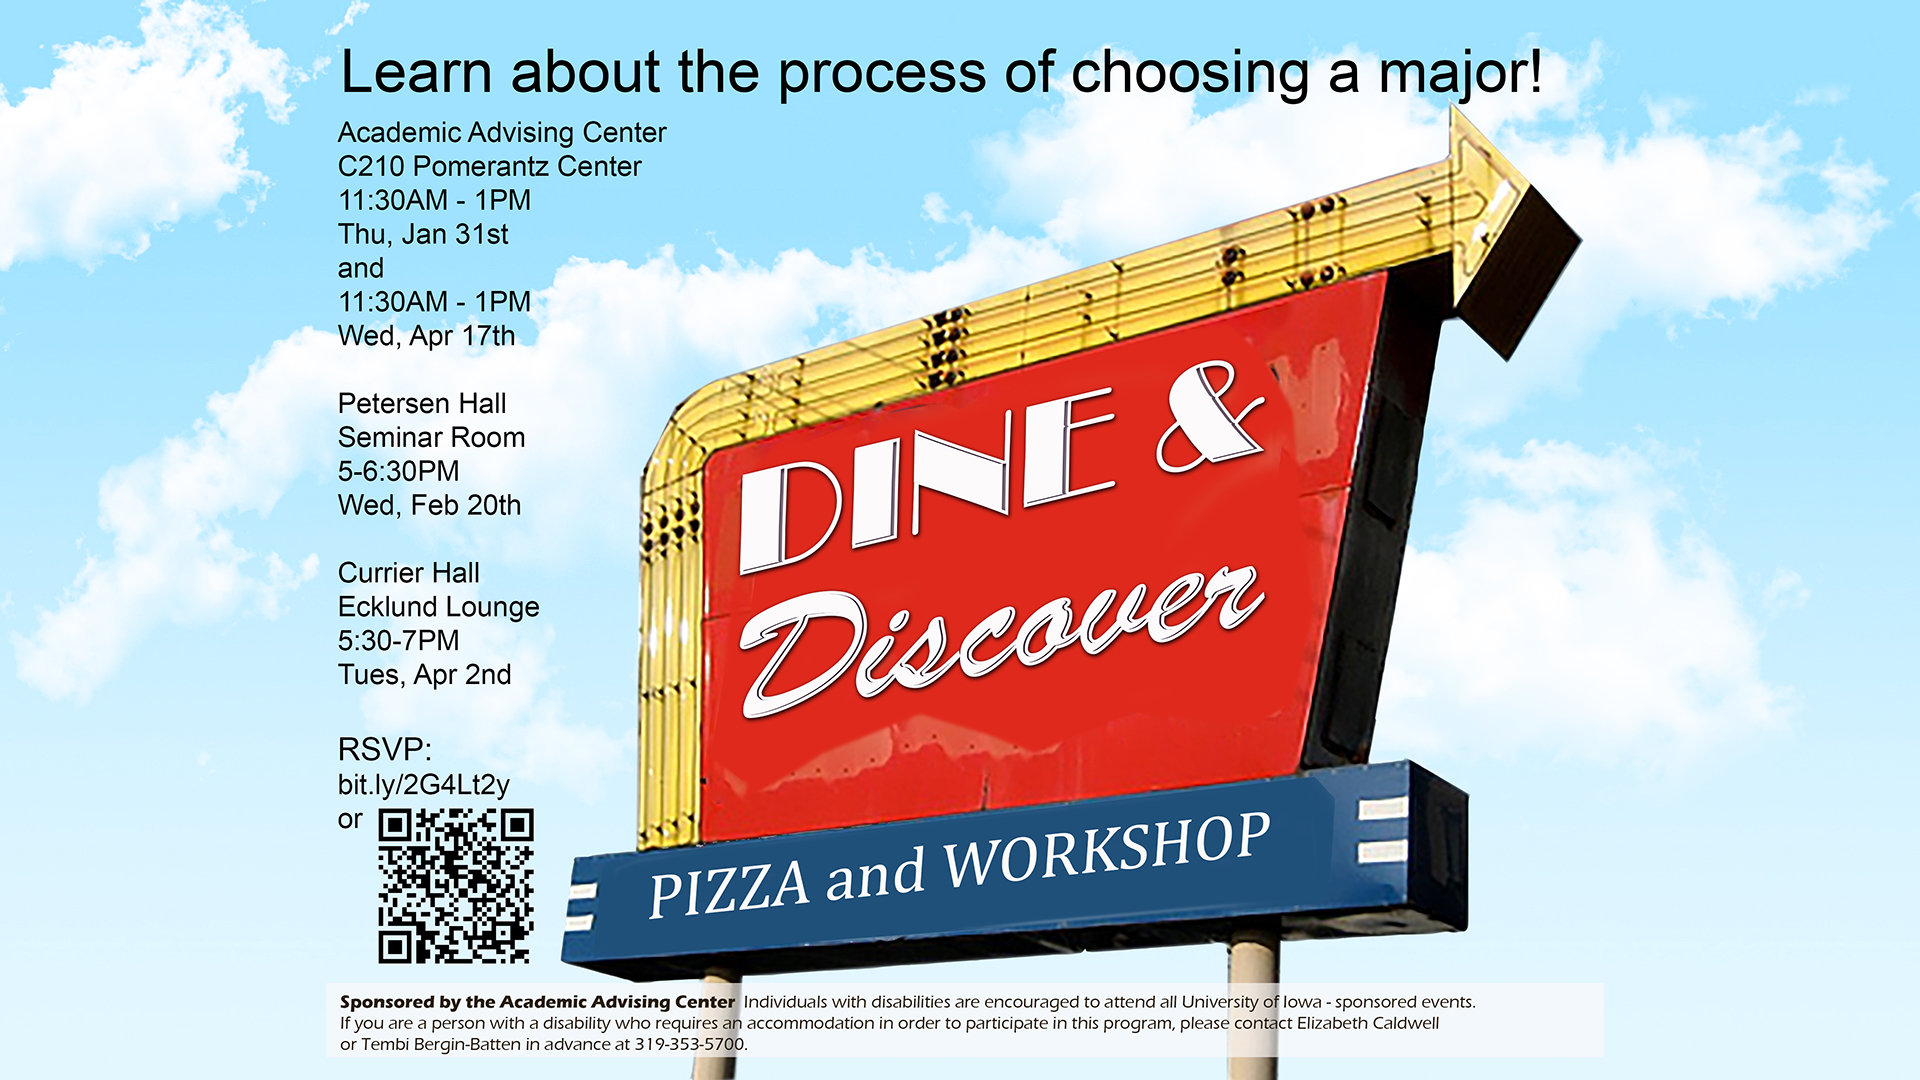 Dine and Discover